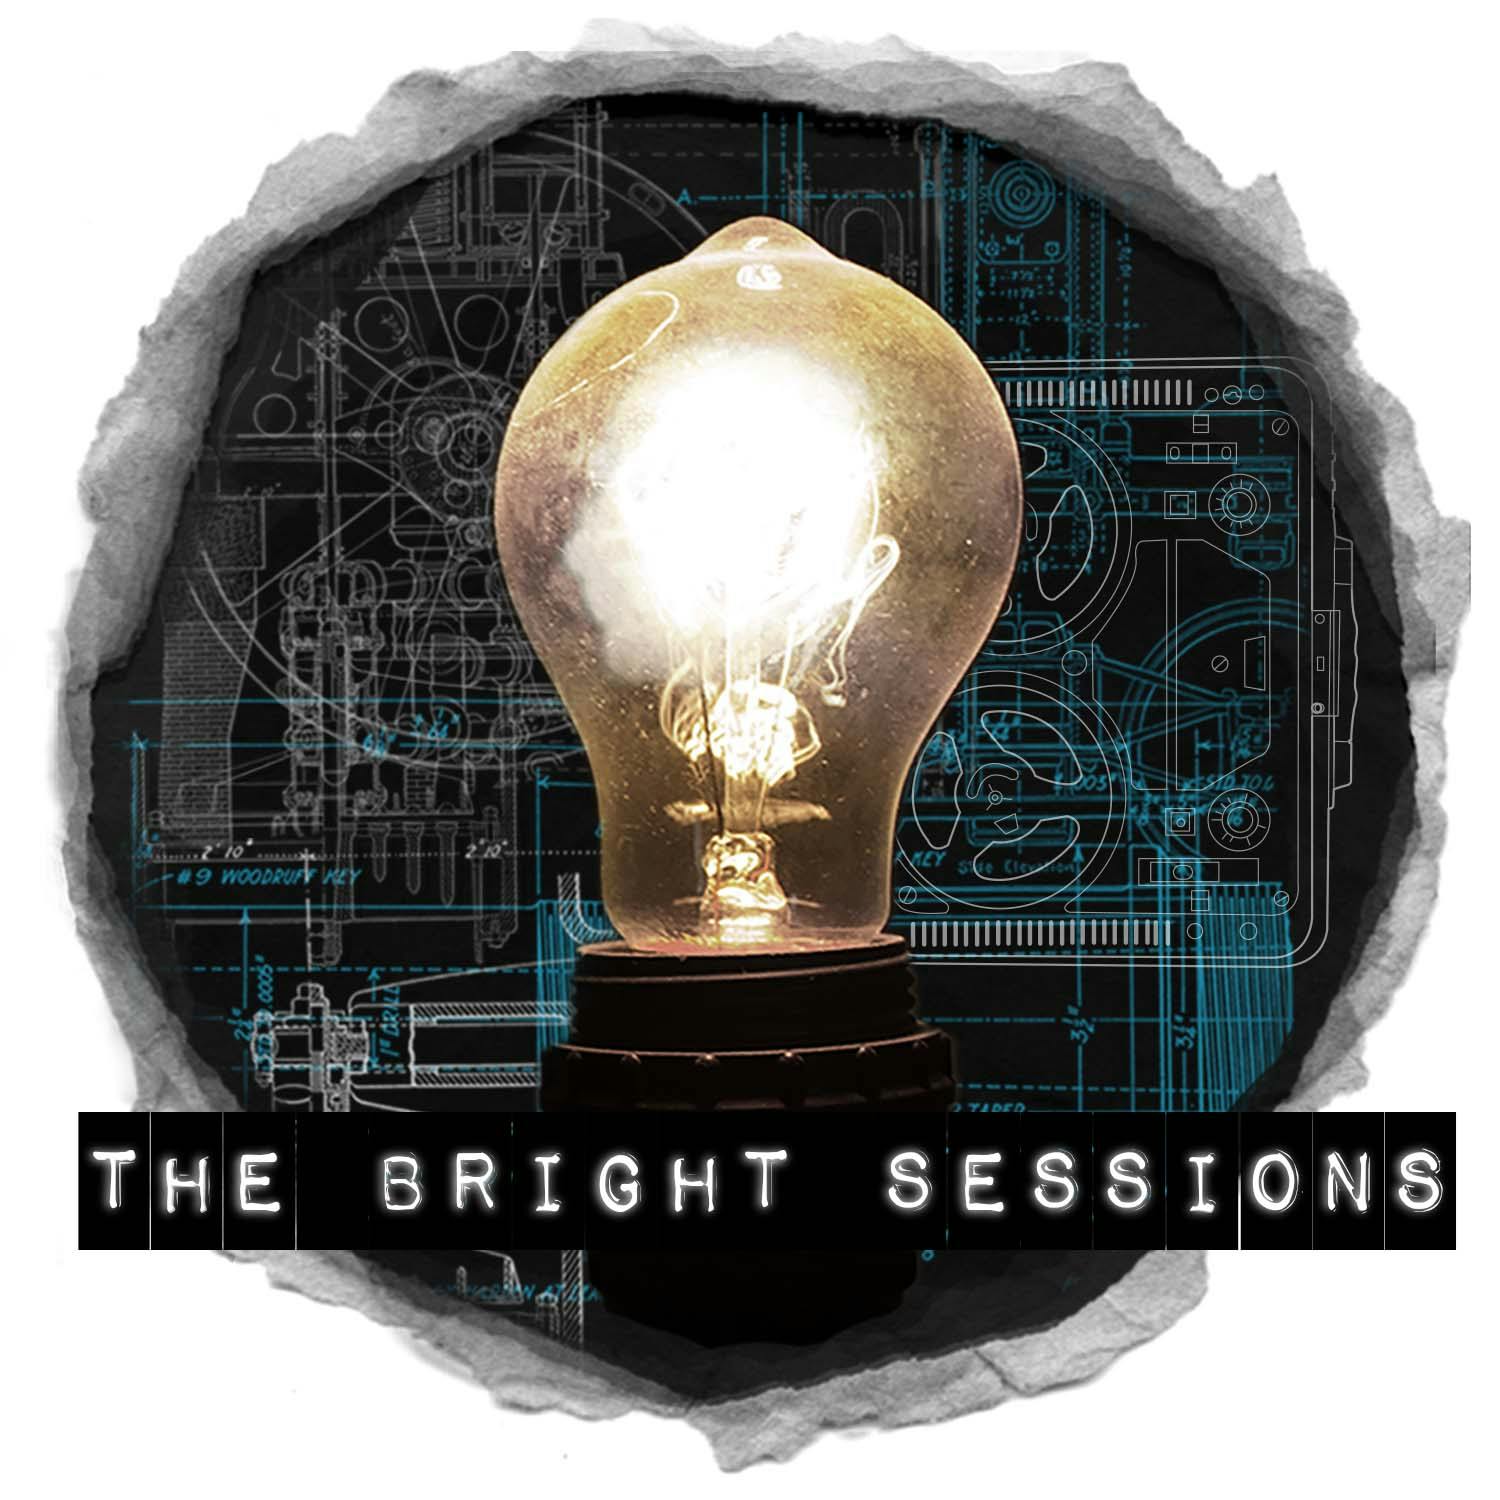 "The Bright Sessions" Podcast